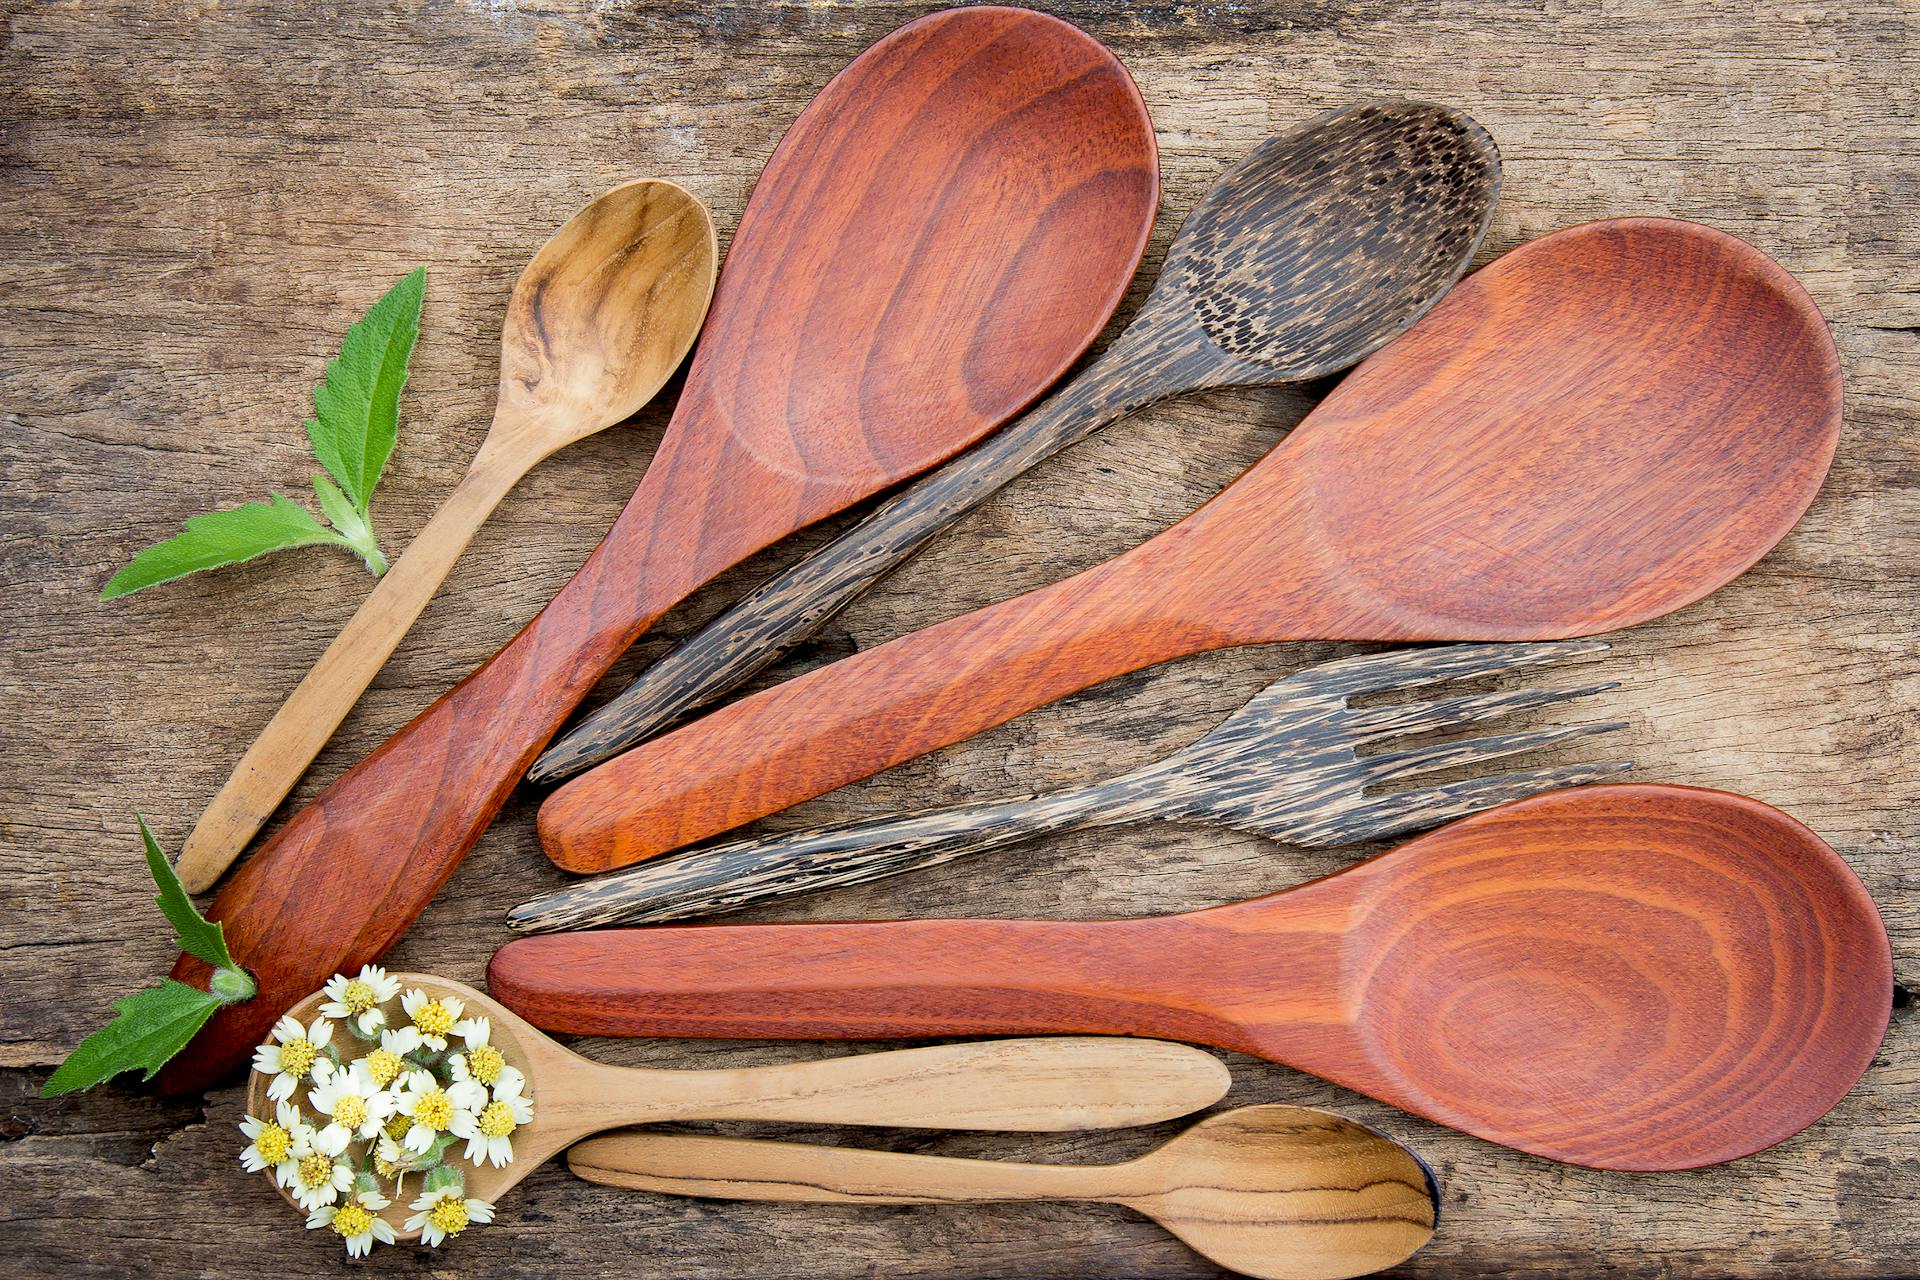 A top view of wooden spoons | Source: Pexels